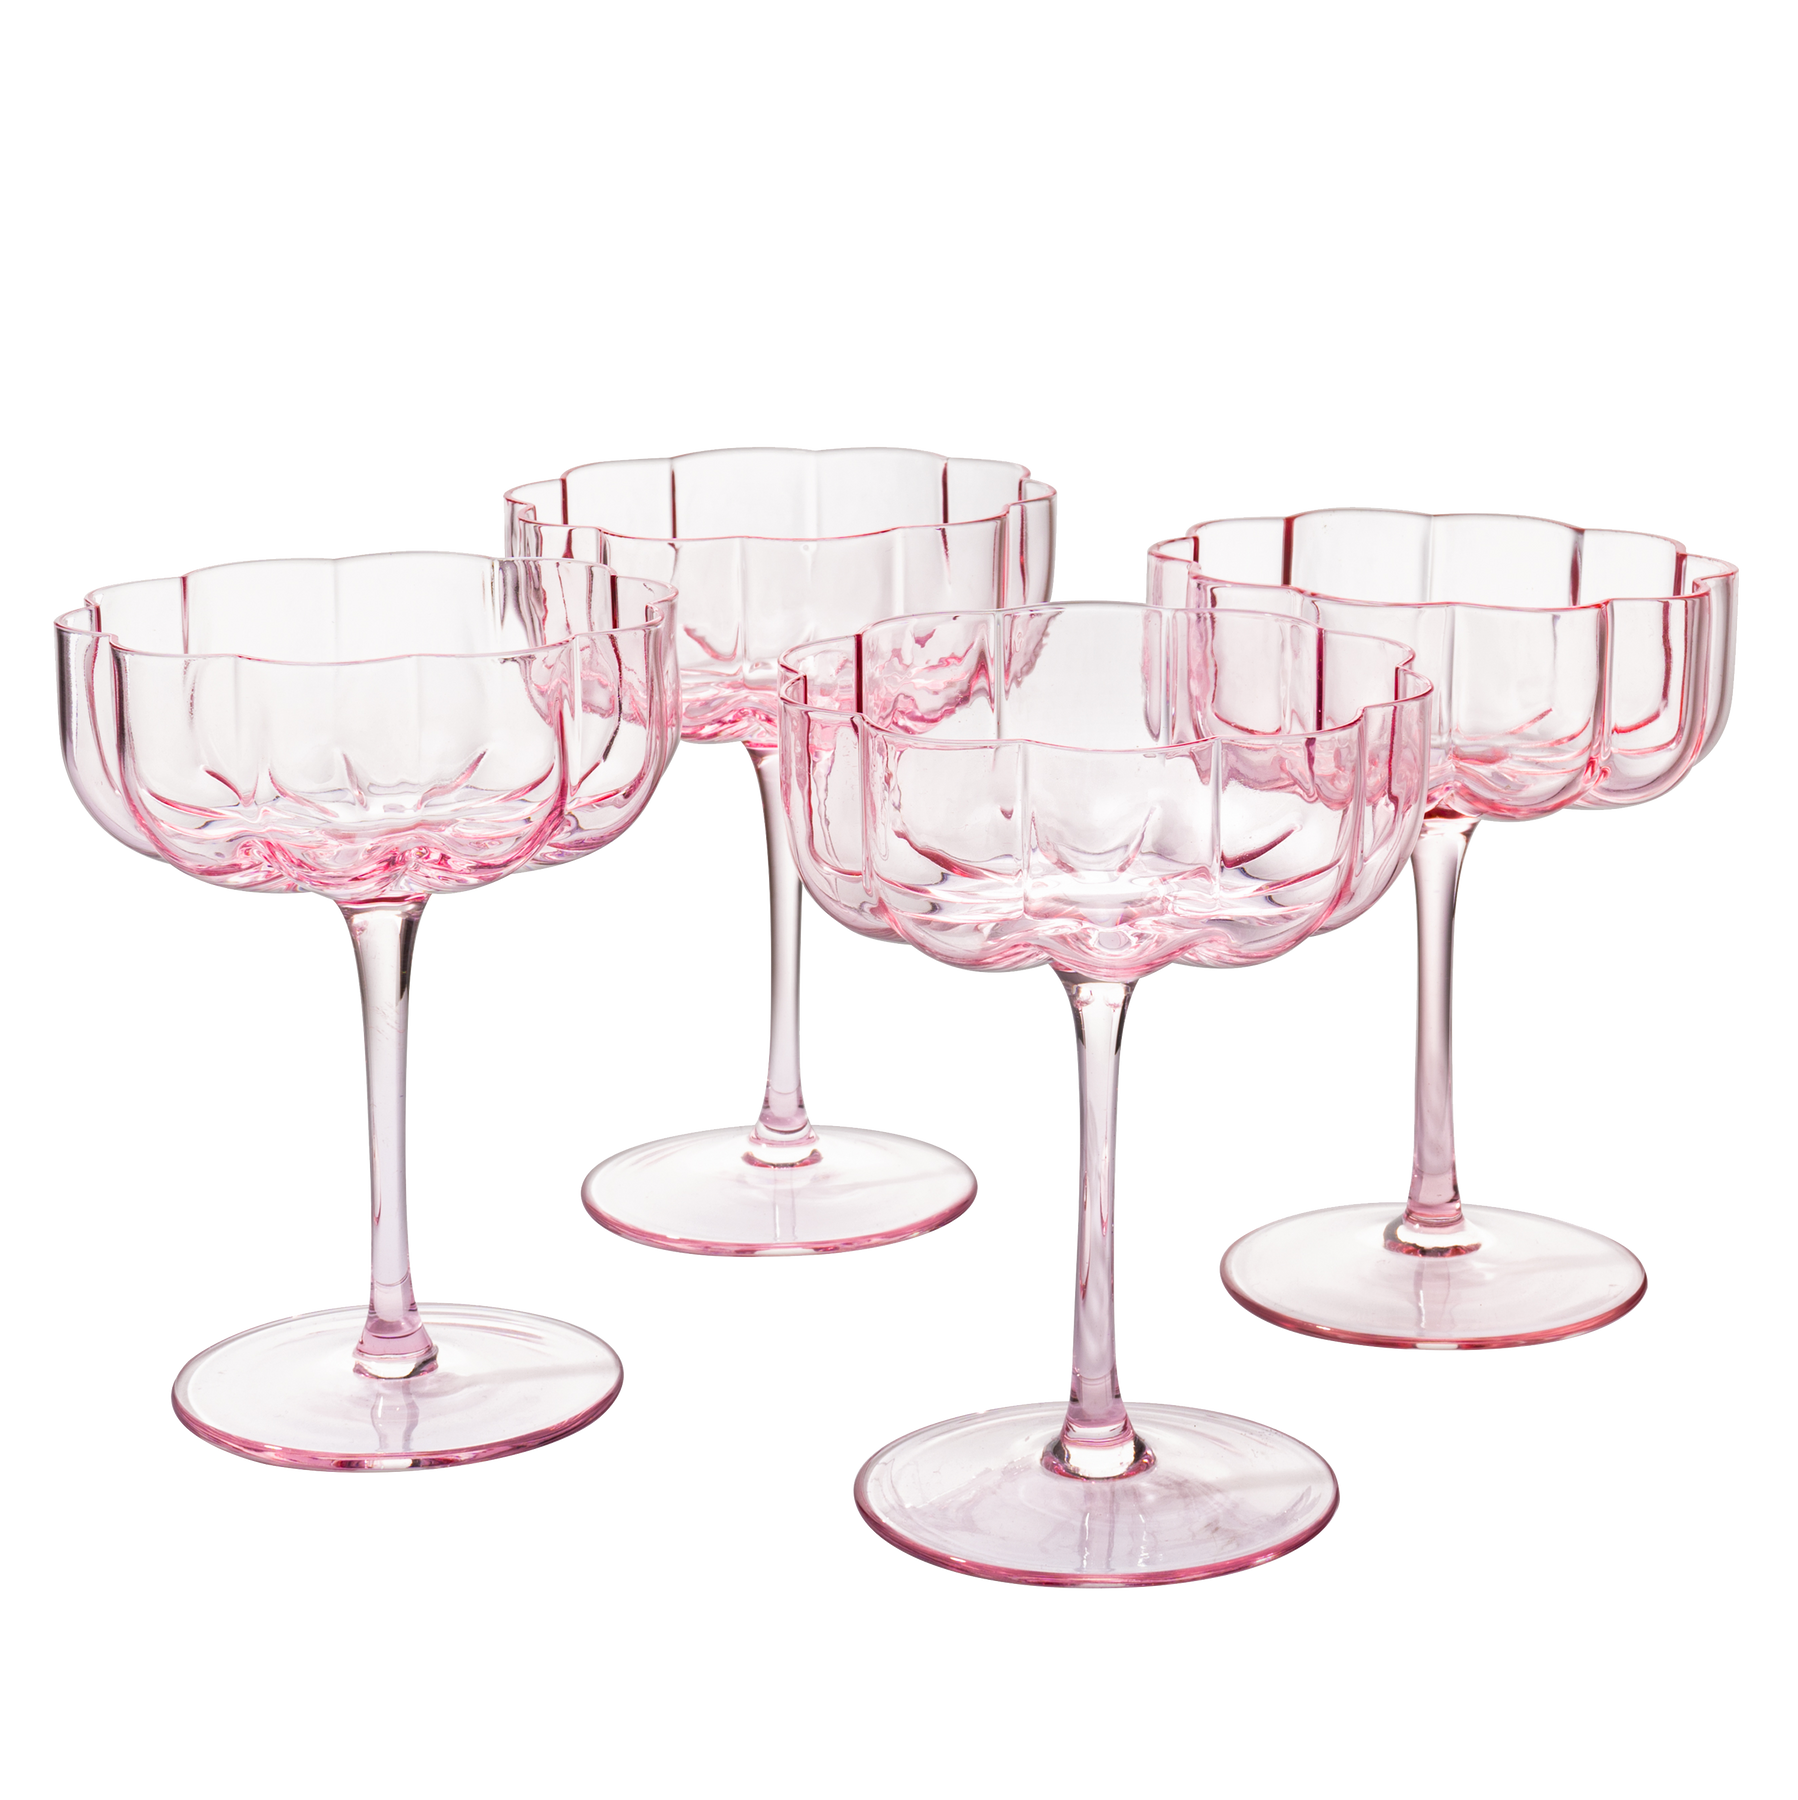 Rose Tinted Crystal White Wine Glasses with Gold Rims - Set of 2